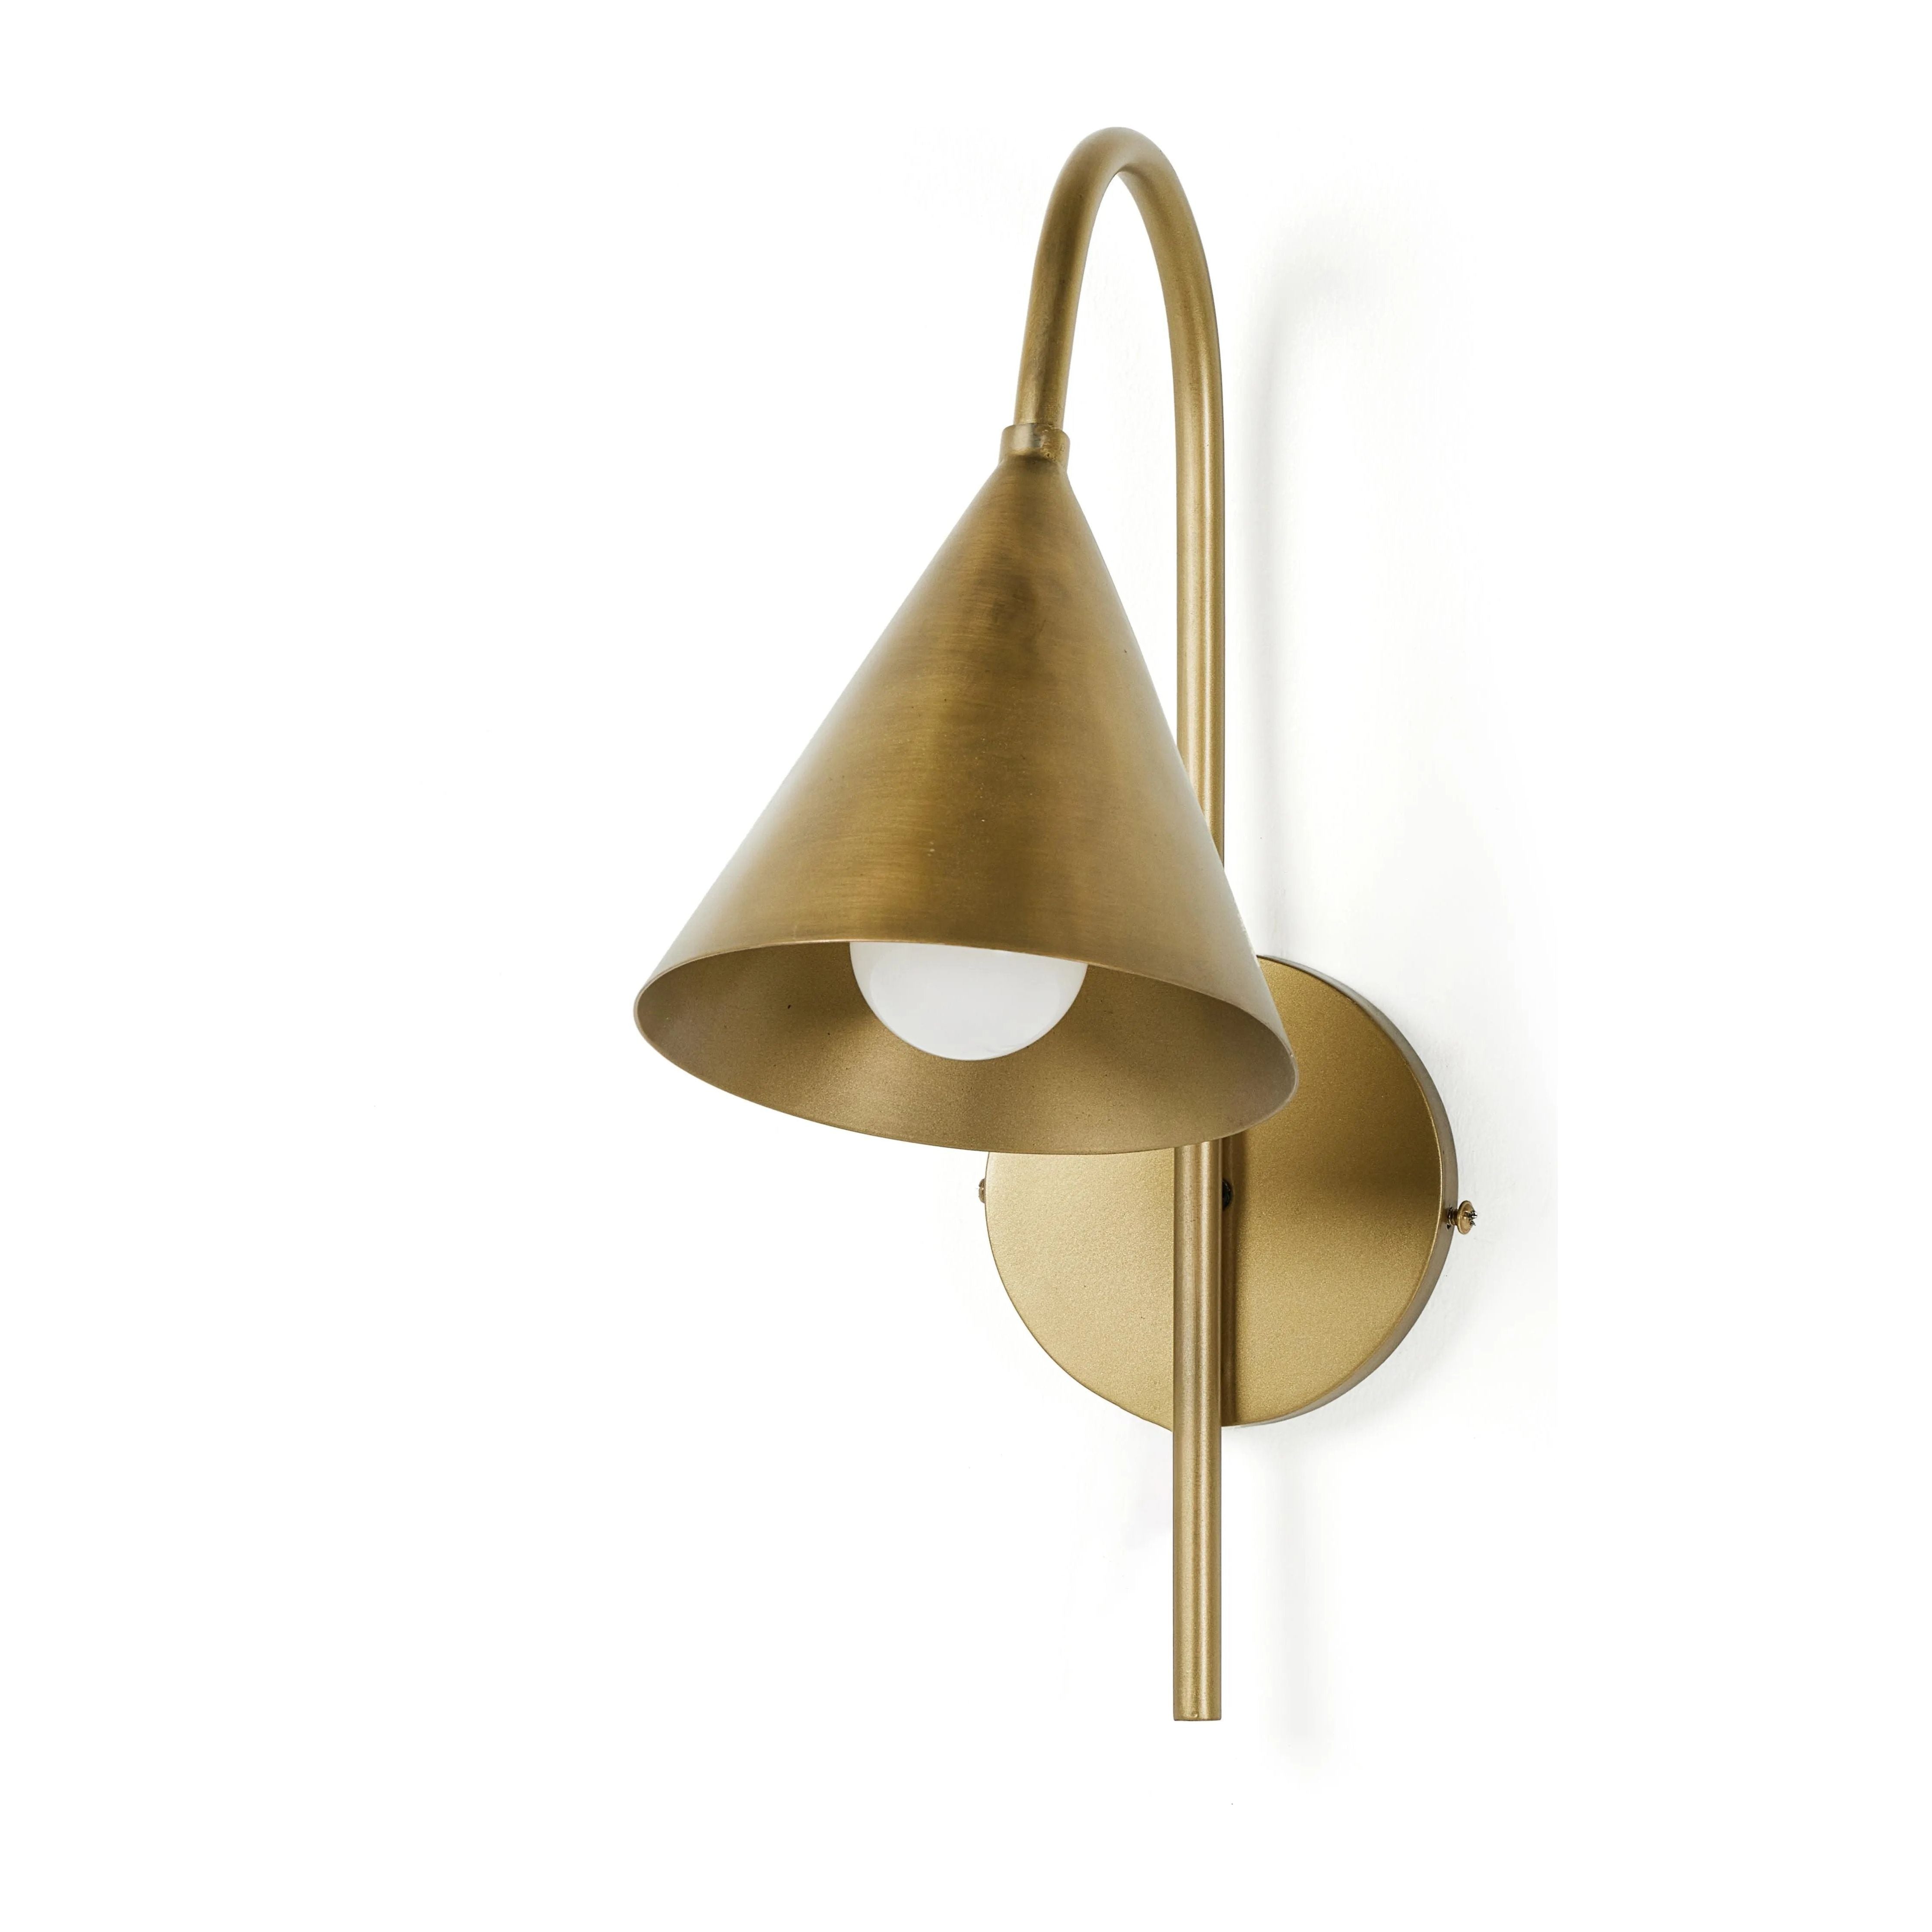 Highlighting the distinctive form and finish of French Industrial lighting, this classic sconce has a light antique brass finish.Collection: Ashe Amethyst Home provides interior design, new home construction design consulting, vintage area rugs, and lighting in the Omaha metro area.